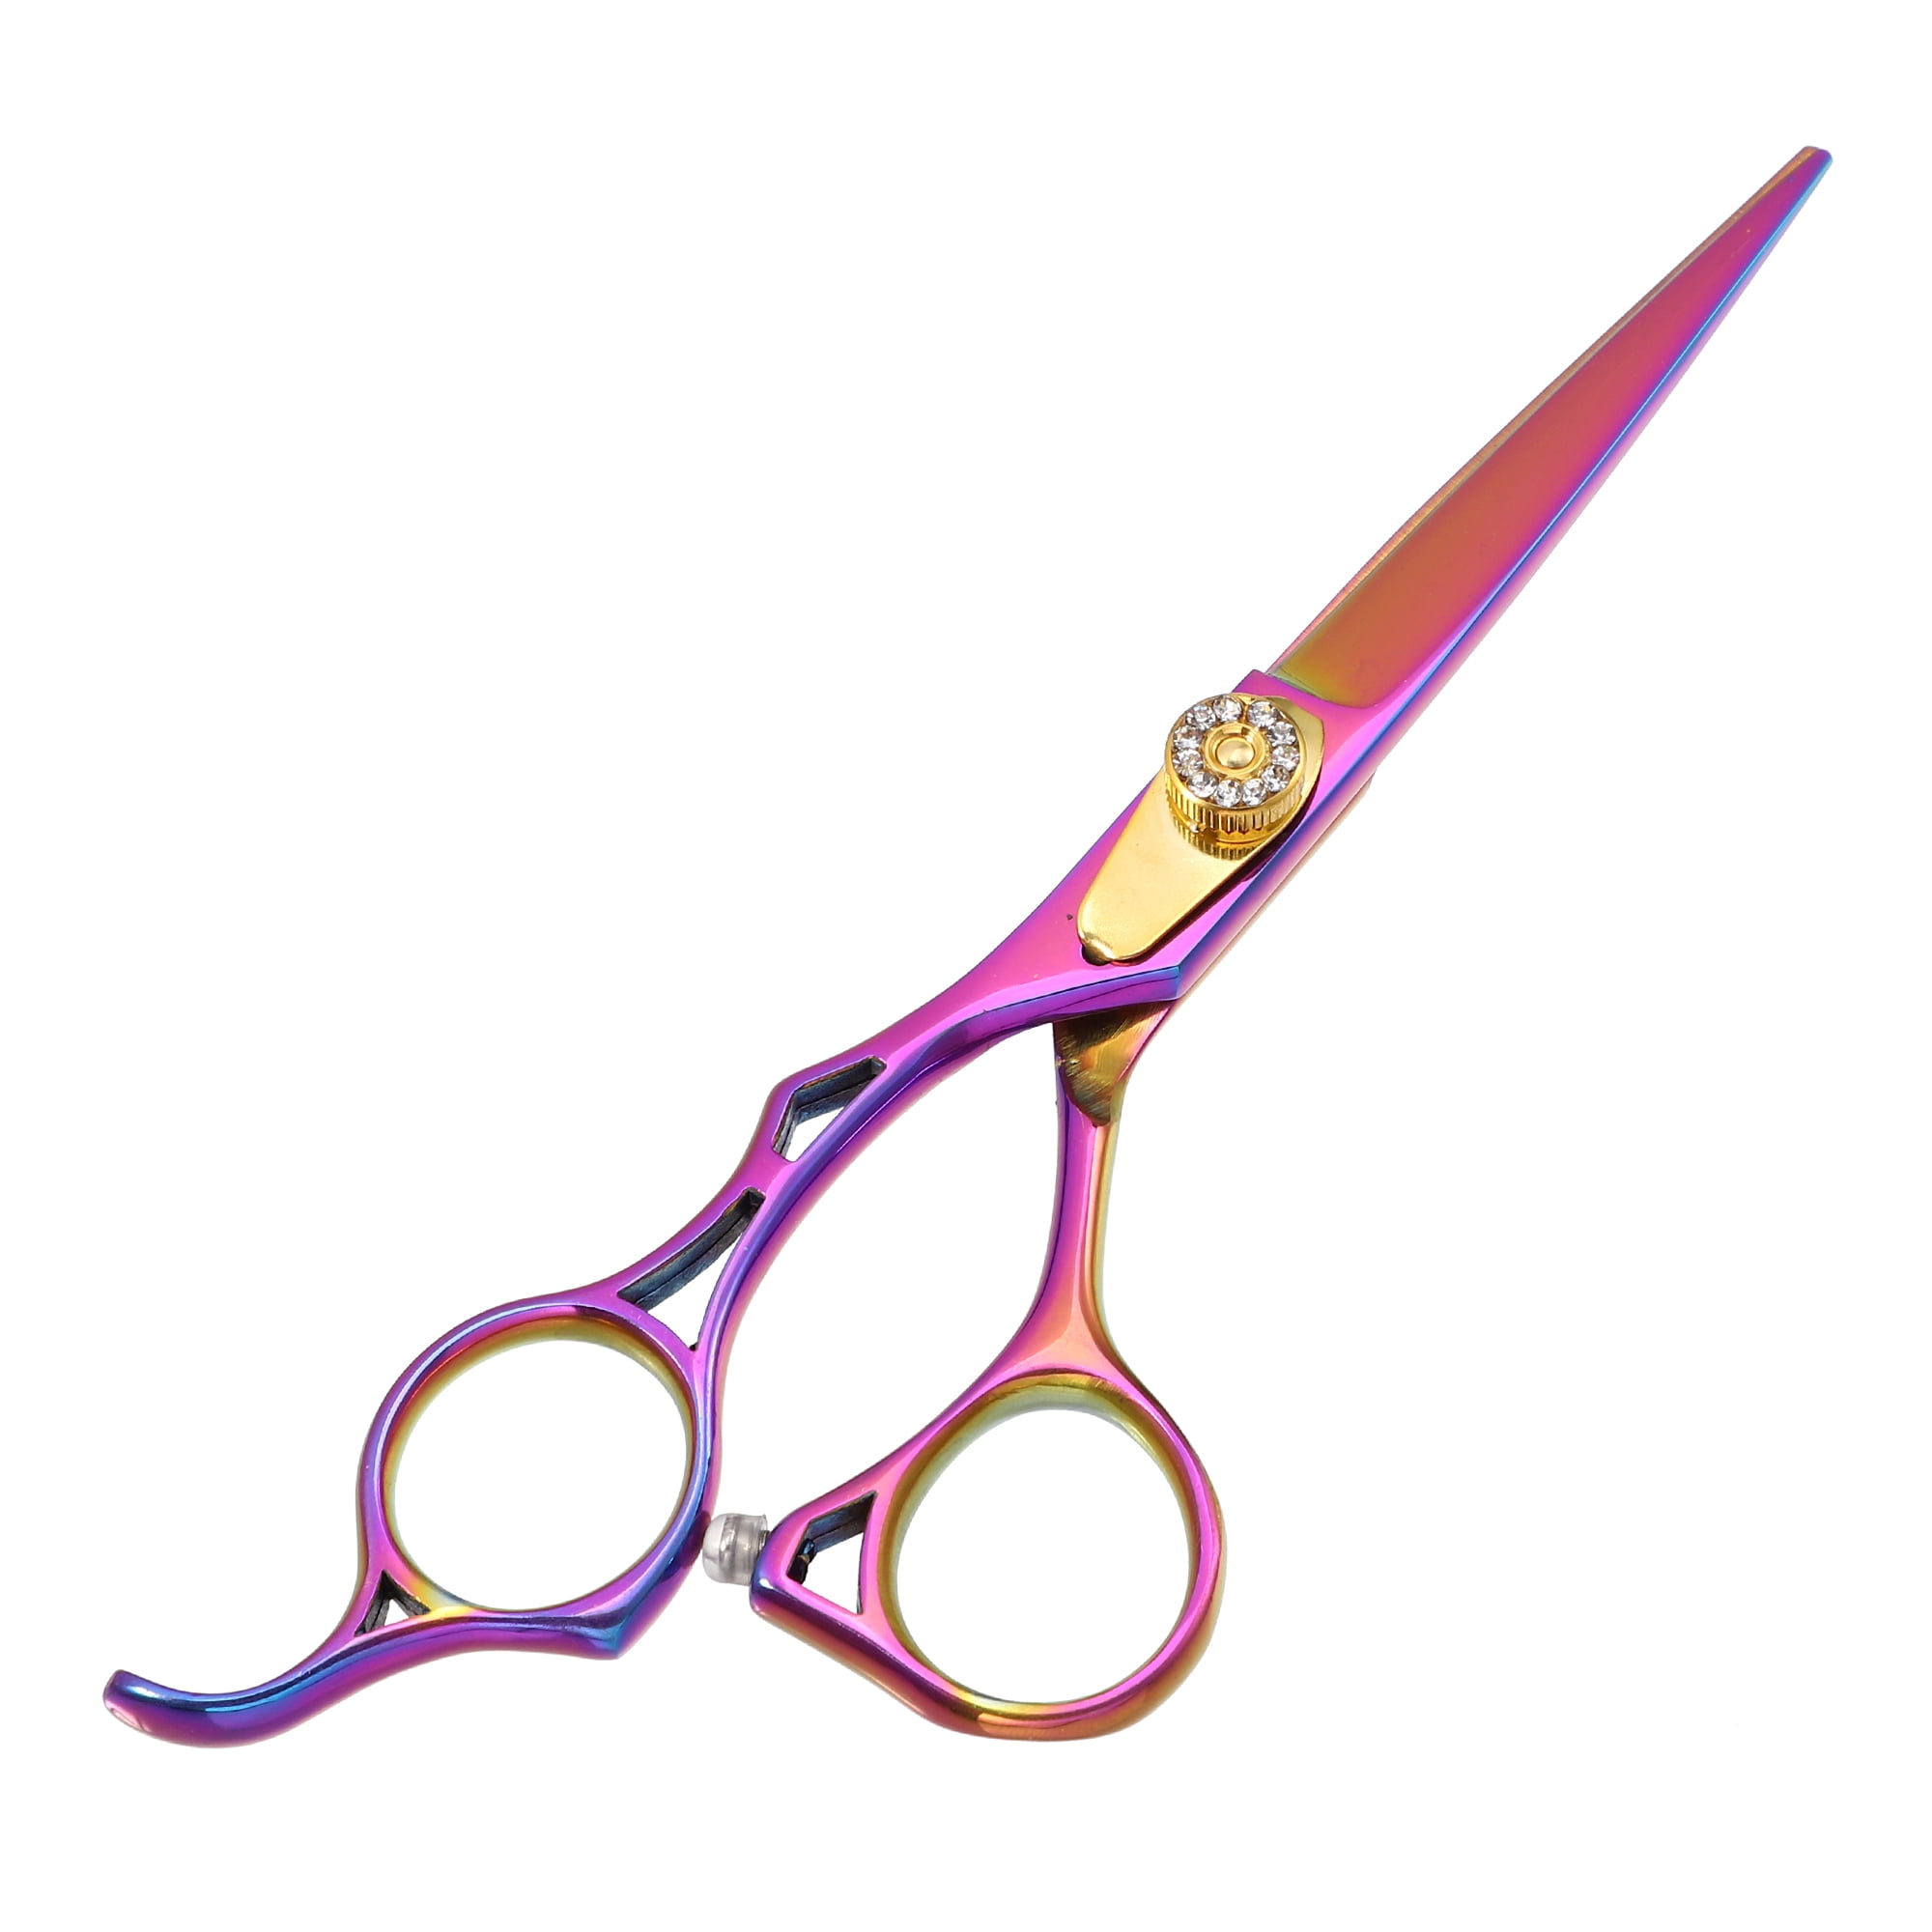 Silk Cut 5 3/4 Left-Handed Hair Cutting Shears and 6 Thinners Set by  Olivia Garden at